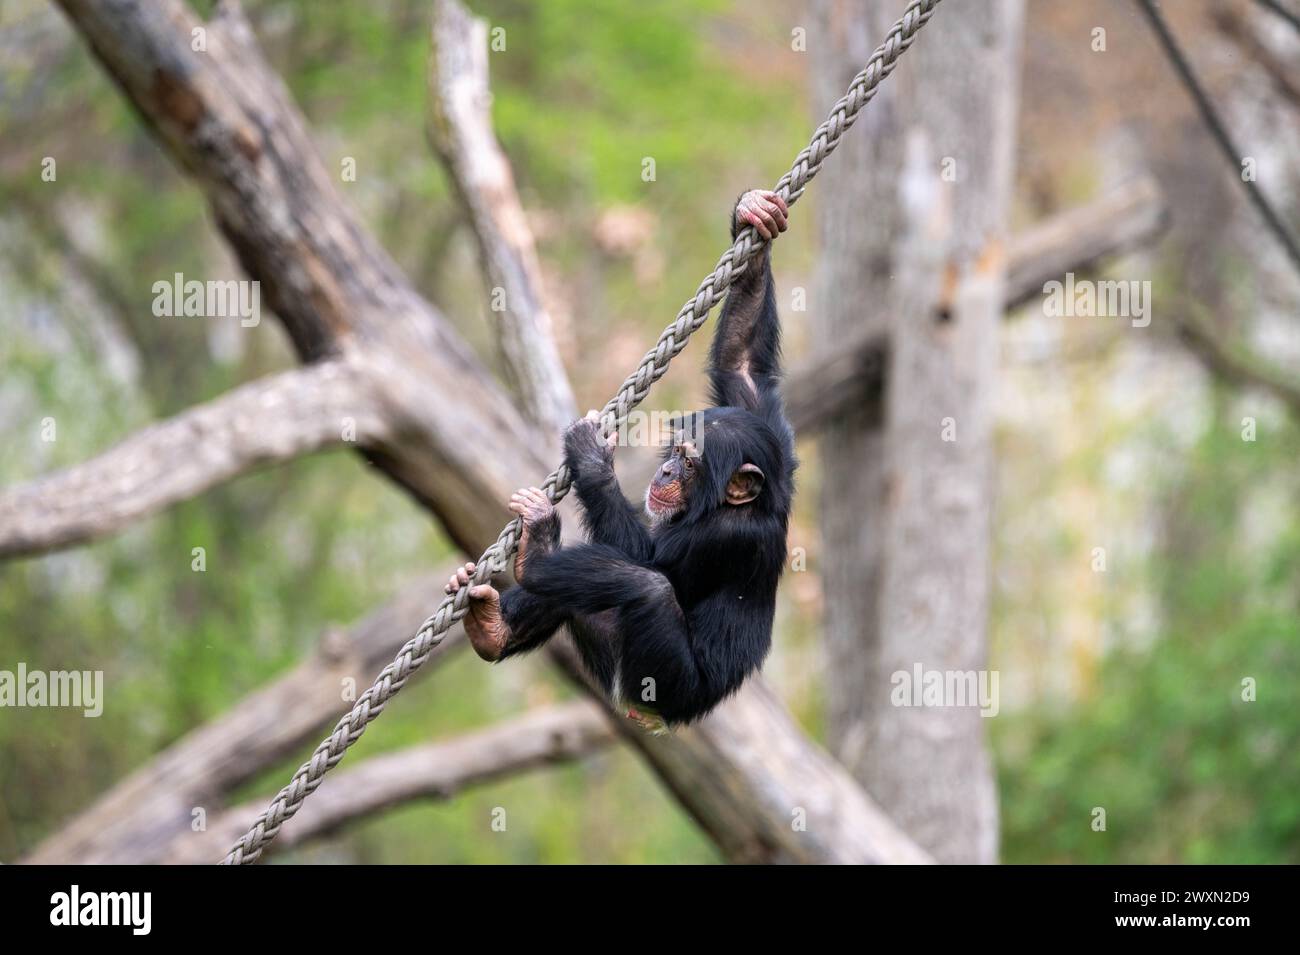 A closeup shot of a chimpanzee swinging on a rope in mid-air Stock Photo